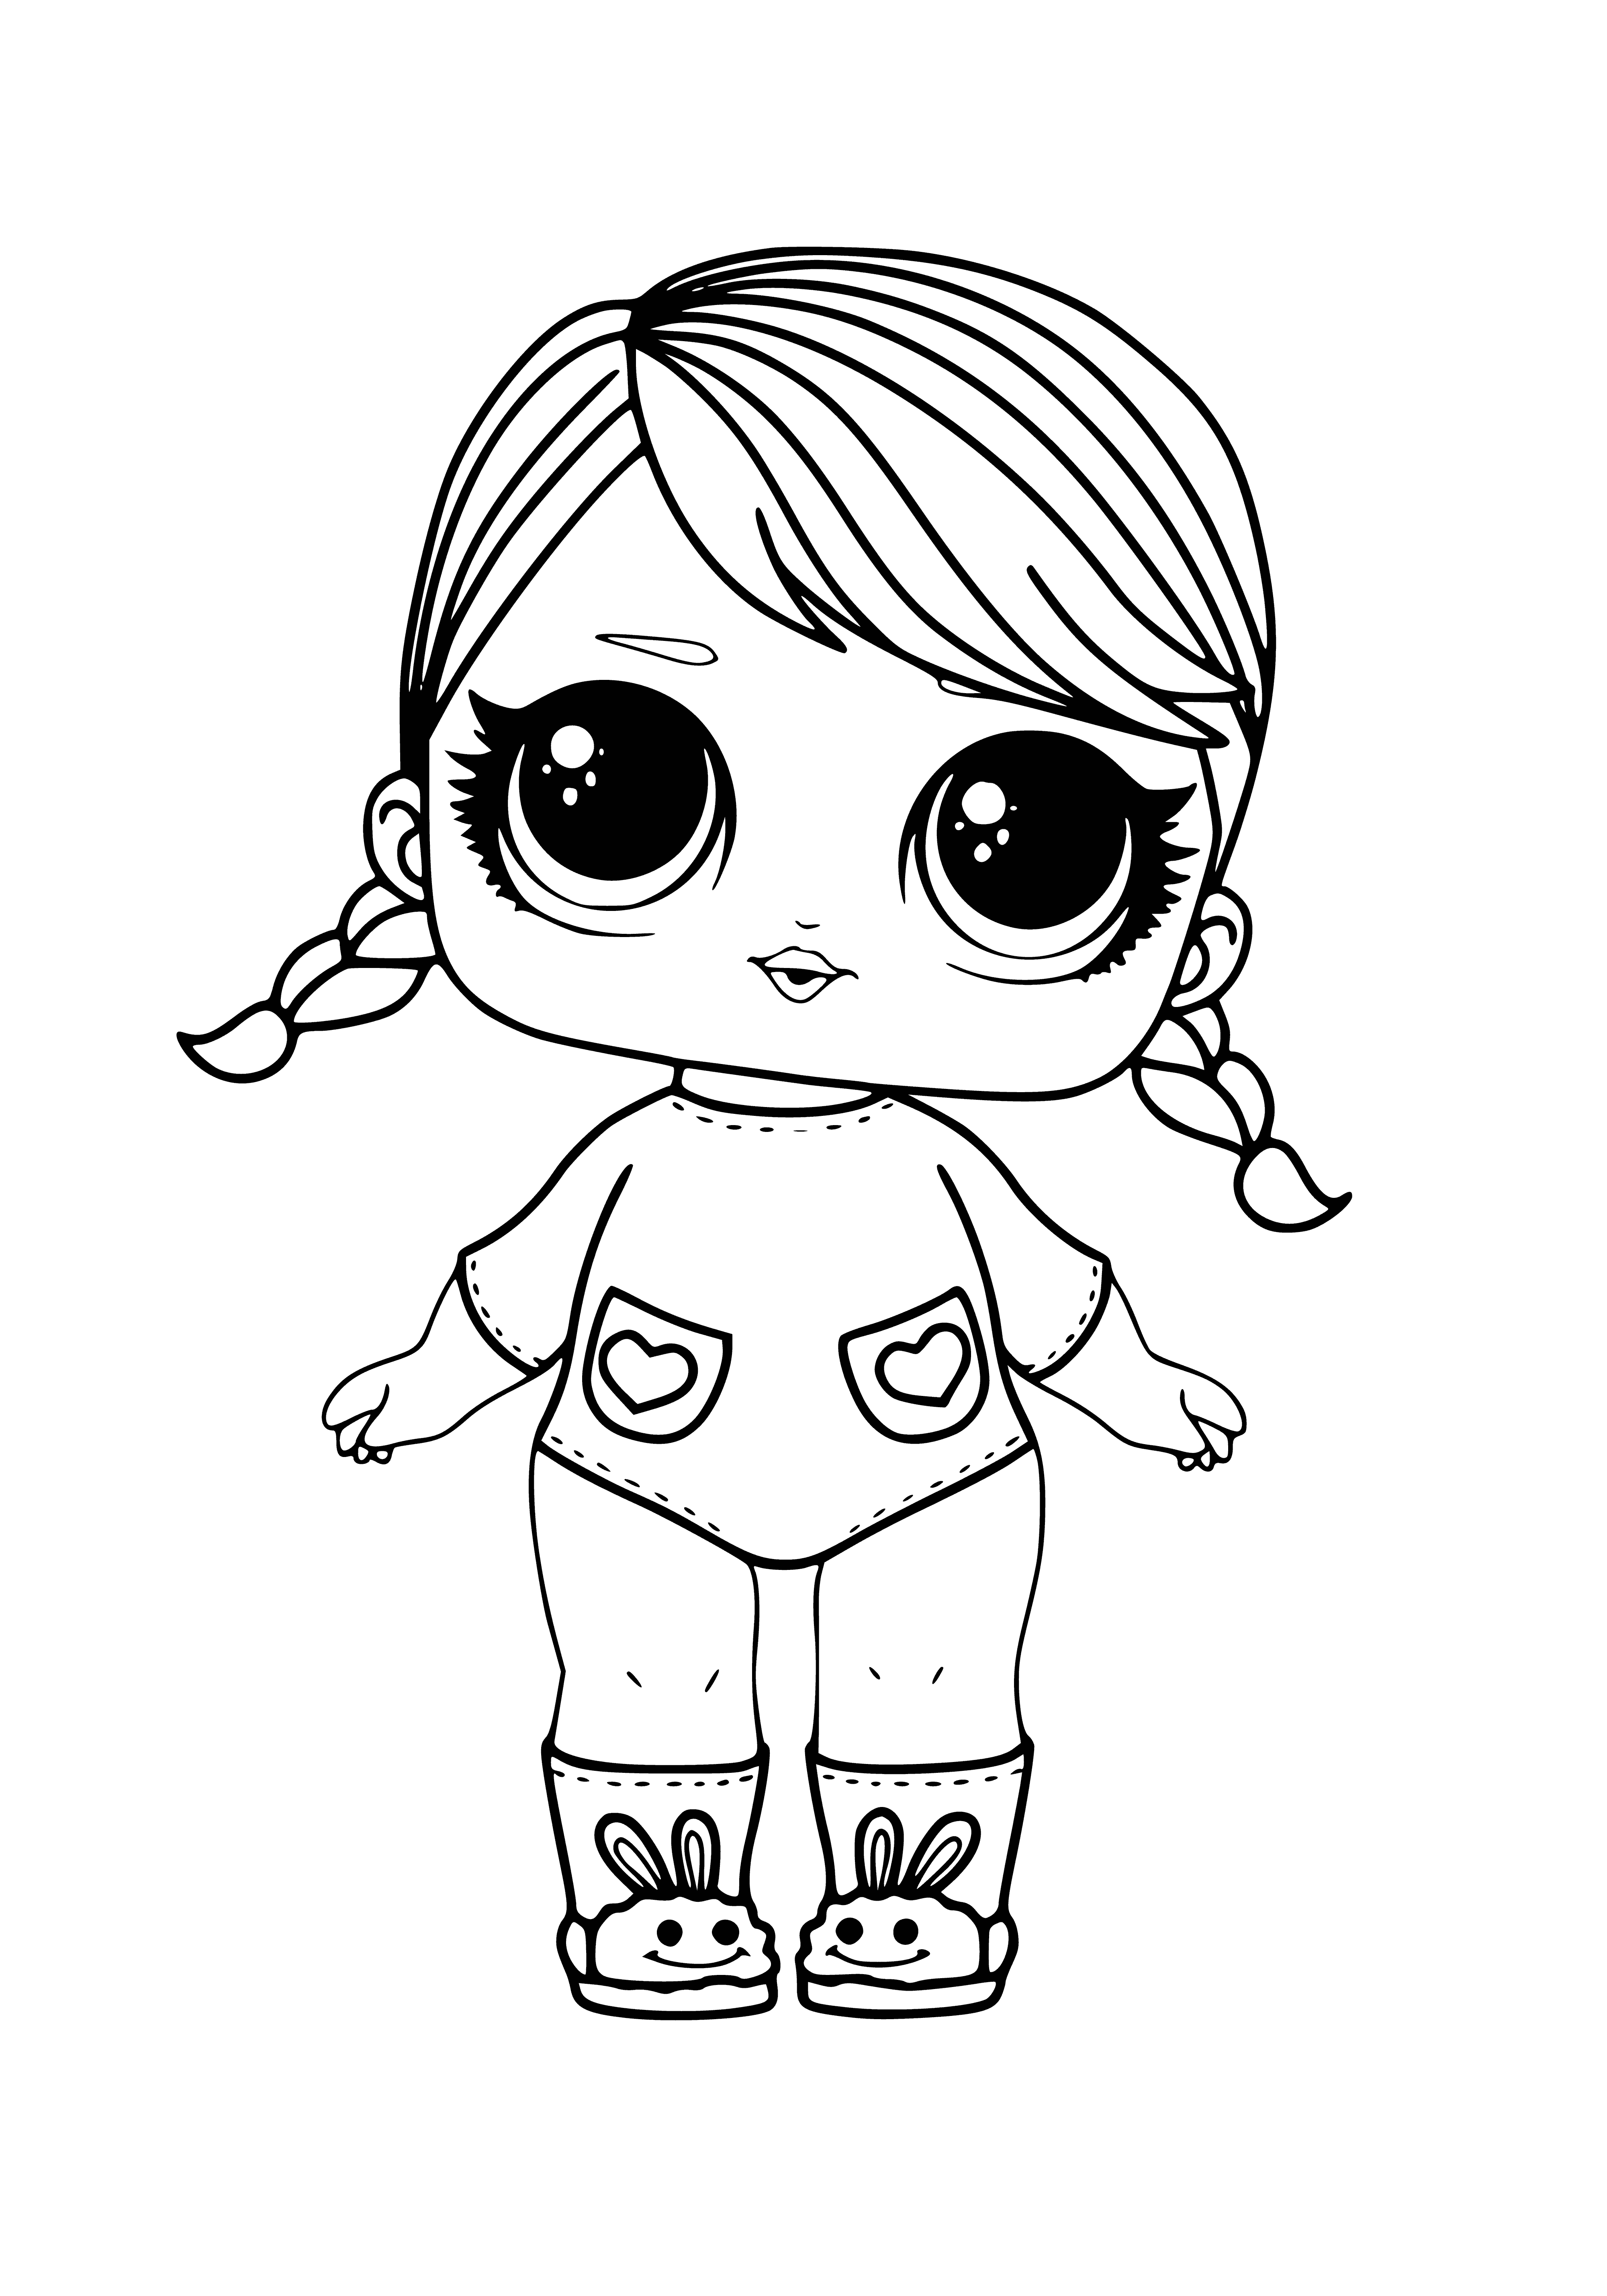 coloring page: Two freckled girls wearing pink & blue dresses holding hands + a yellow minion holding a "LOL" sign = LOL Cutie.